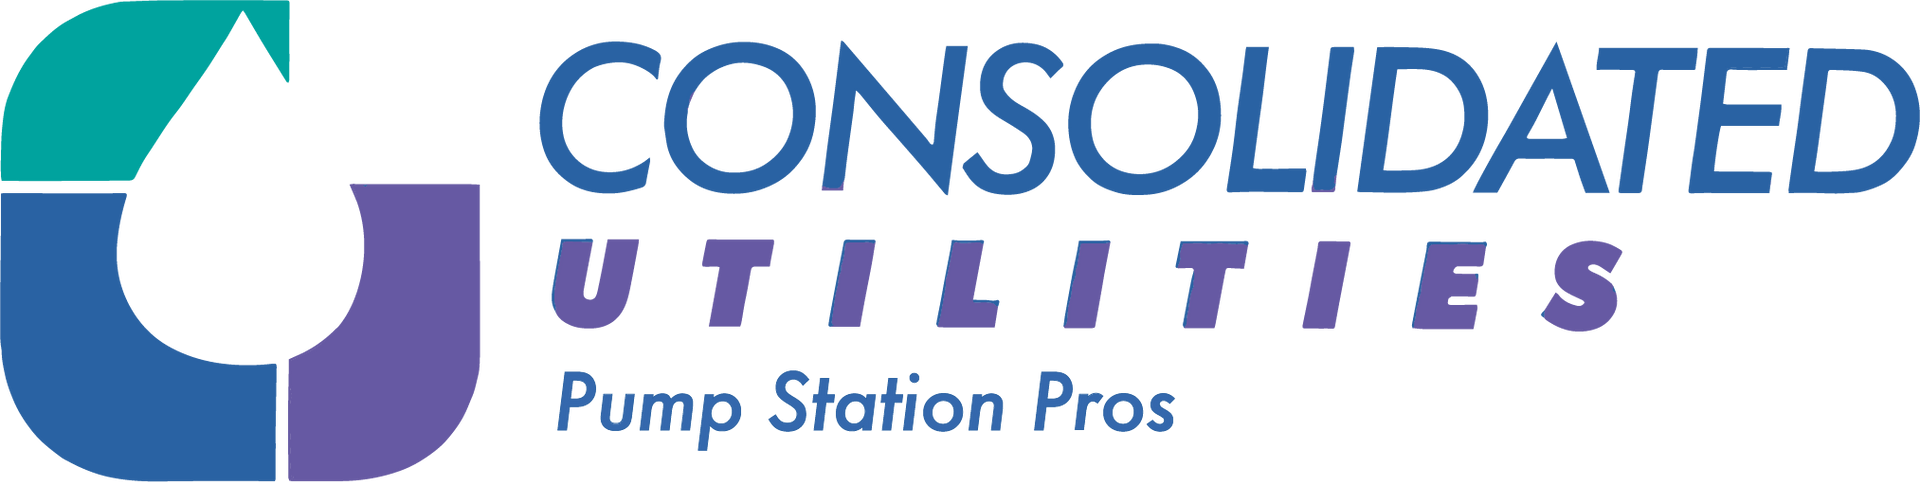 Consolidated Utilities Plumbing & Pump Station Pros